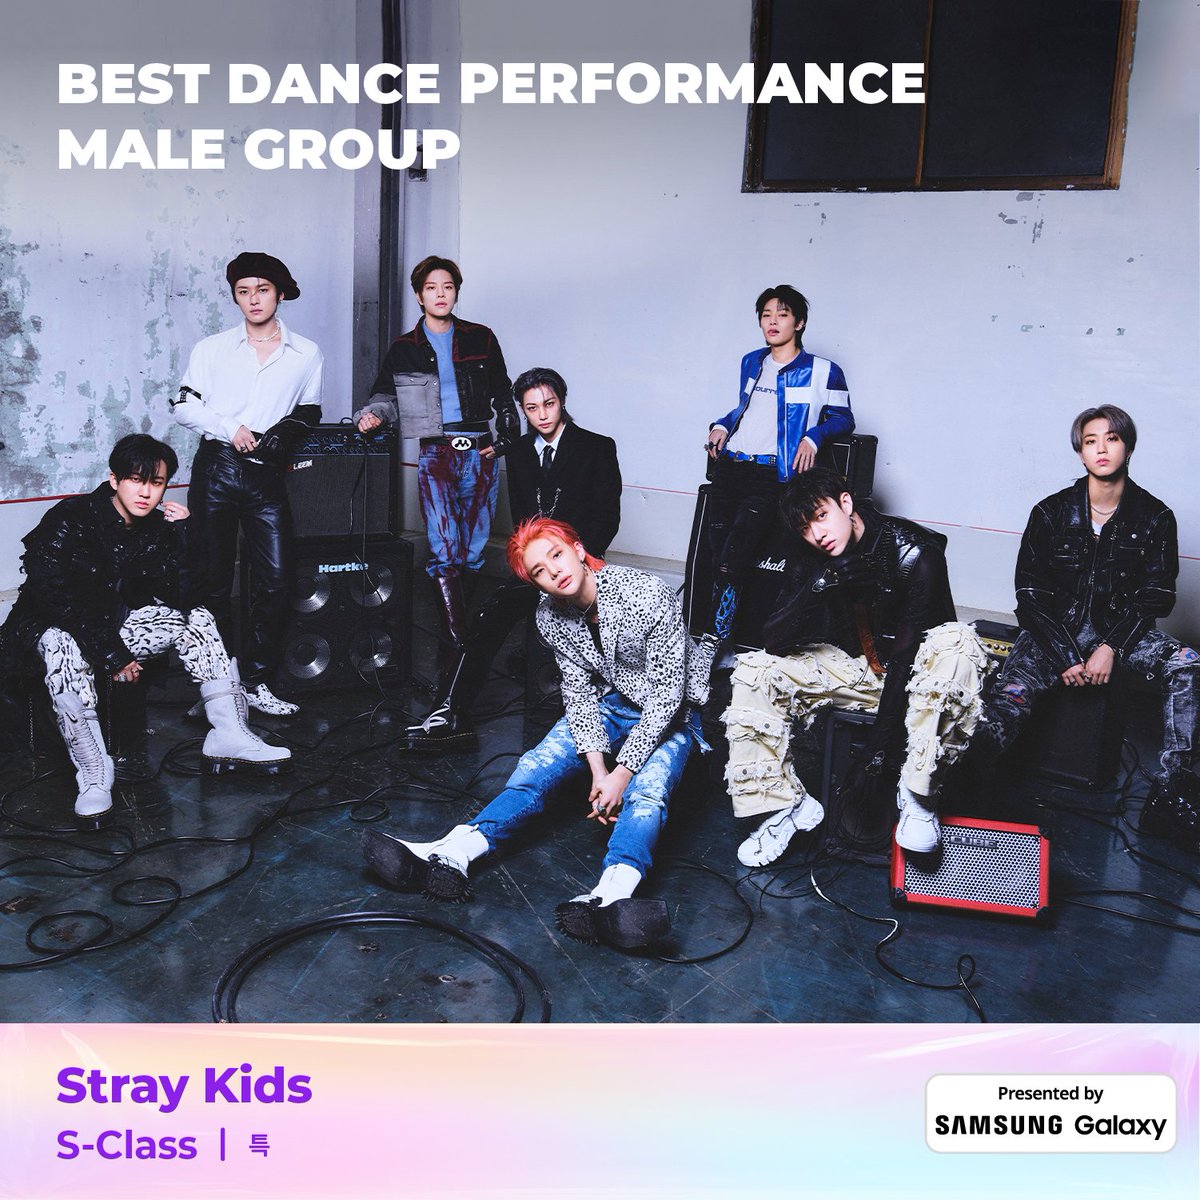 🏆 #StrayKids NOMINATIONS at the 2023 MAMA AWARDS: 🌍 Worldwide Fans’ Choice 👬 Best Male Group 📺 Best Music Video — S-Class 🕺 Best Dance Performance Male Group — S-Class 🗳️ 2023mama.com